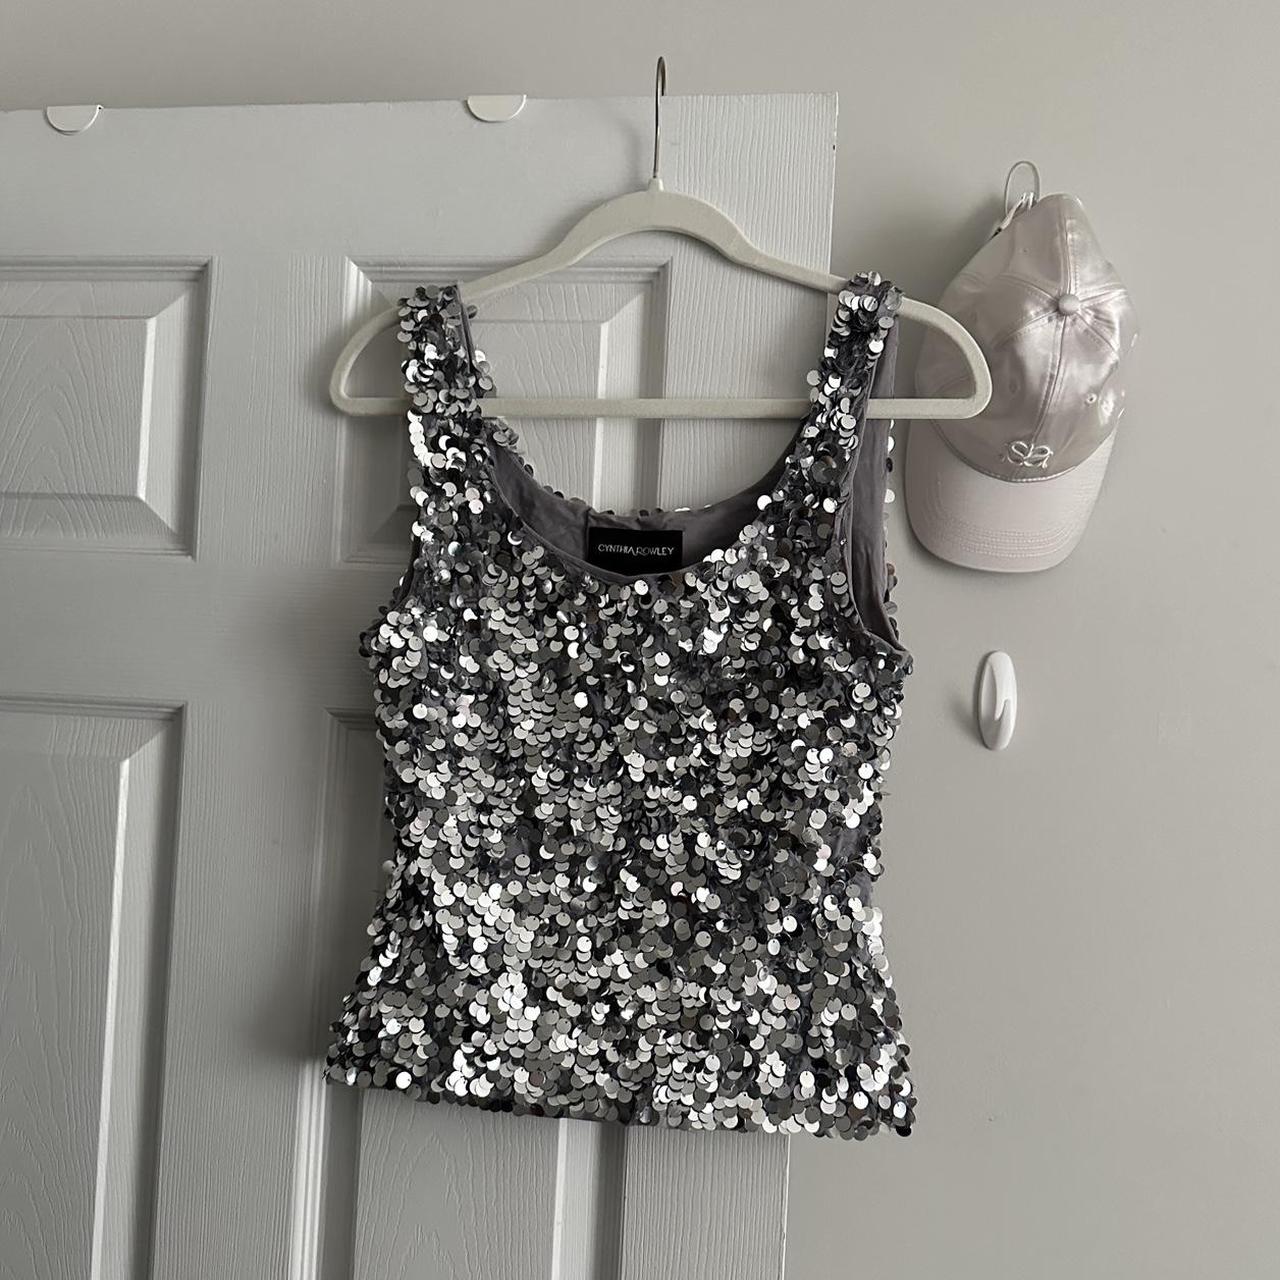 Silver Sequin Embellished Tank – Cynthia Rowley